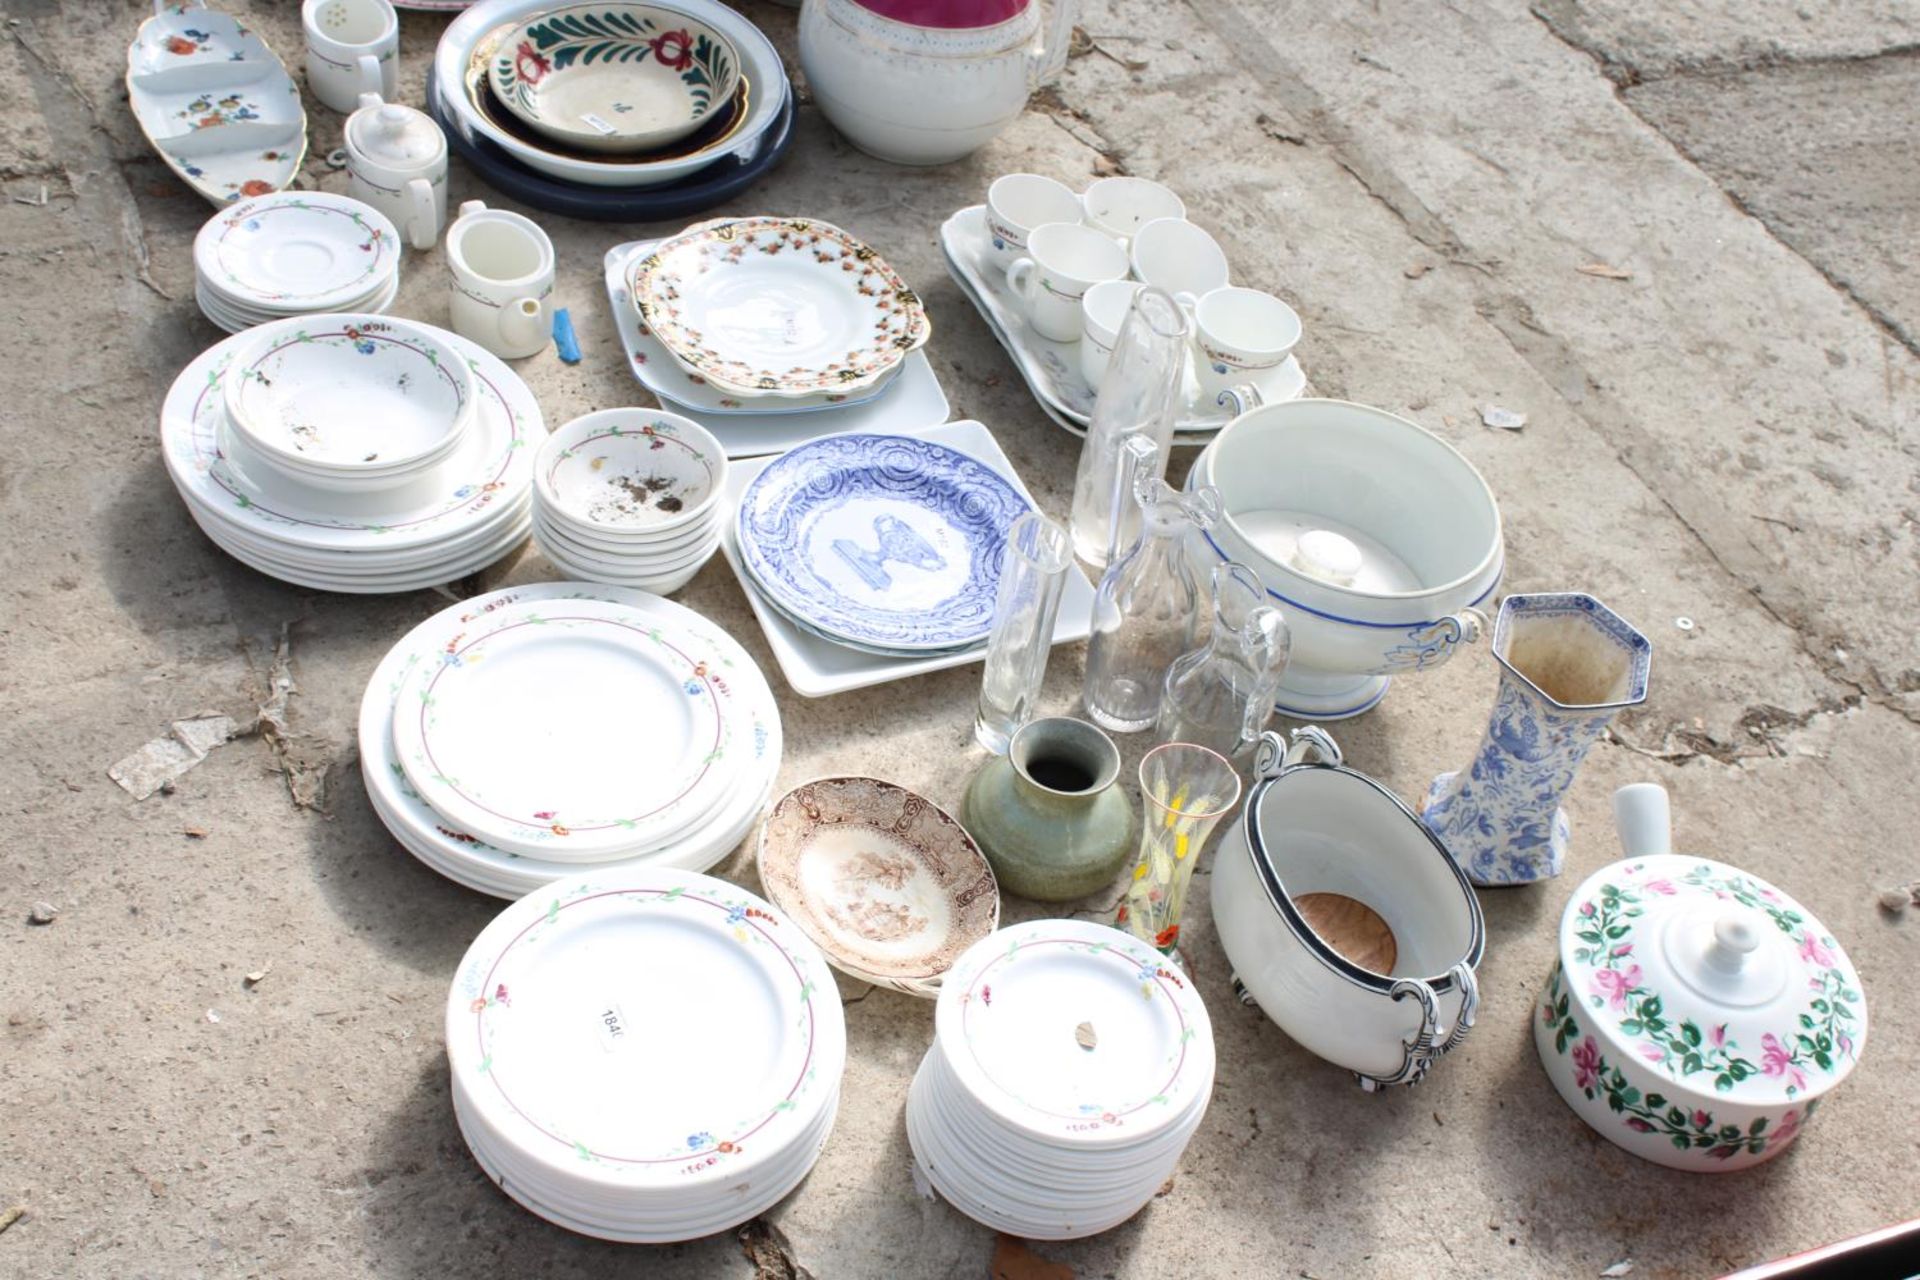 A LARGE ASSORTMENT OF CERAMICS AND GLASS WARE TO INCLUDE PLATES, BOWLS AND A JUG ETC - Image 2 of 4